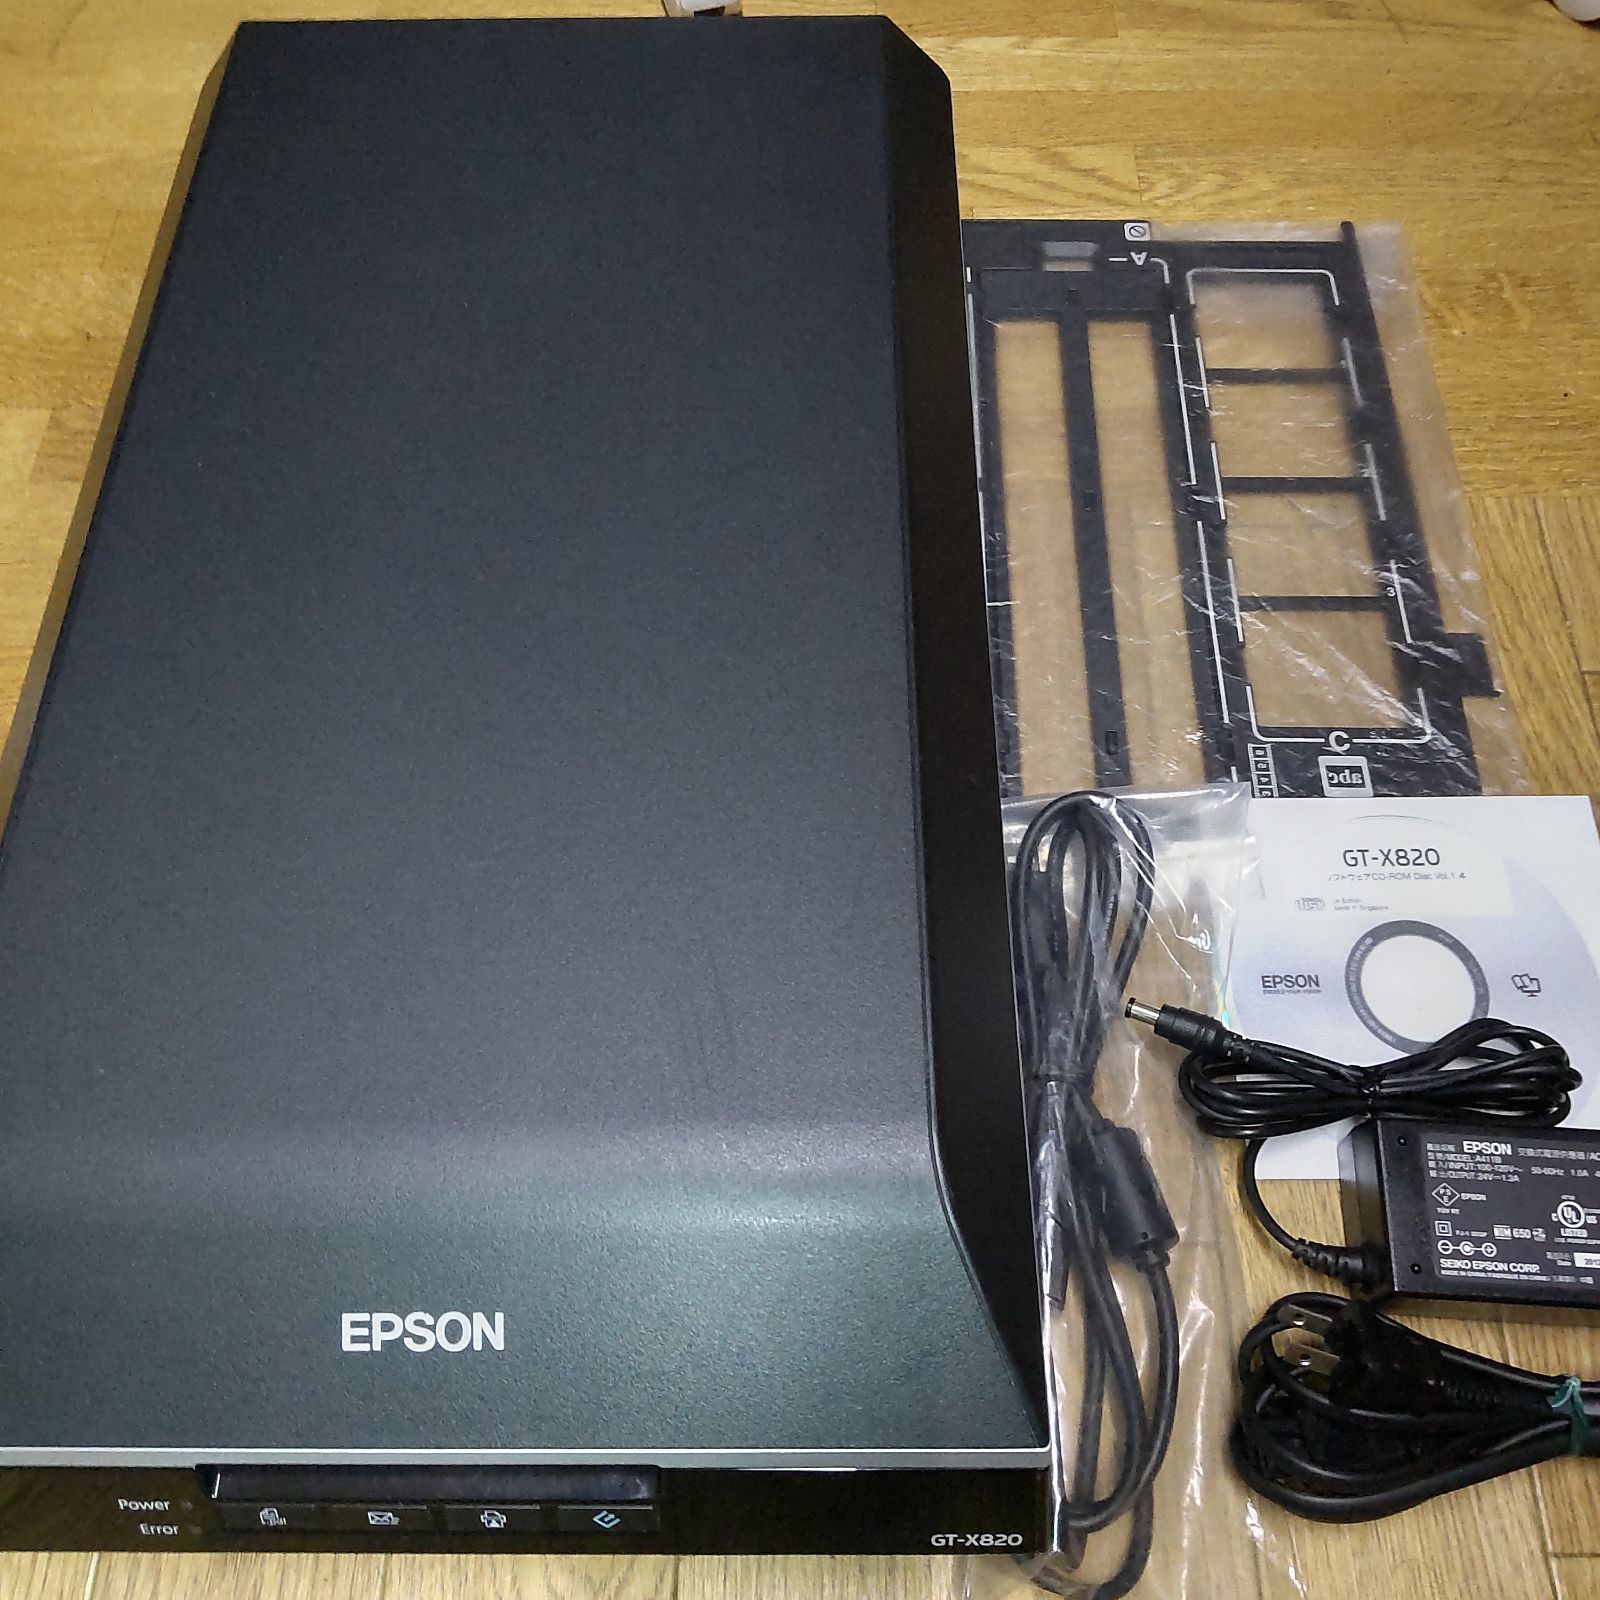 EPSON GT-X820 フィルムスキャナー フィルムホルダー付属 動作良好